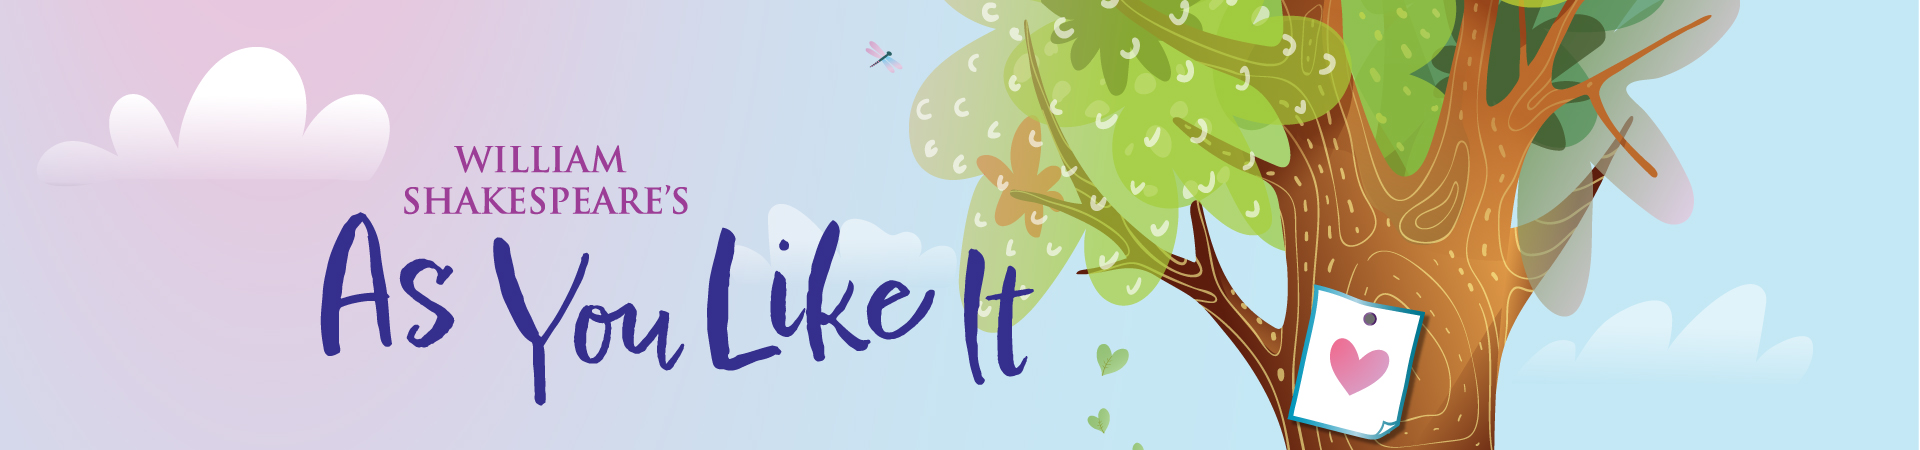 Slider of bluish-pink "sky" background with a tree in the foreground. It features green foliage in a cartoonish style and a love note tacked to the front. Text reads, "William Shakespeare's As You Like It."